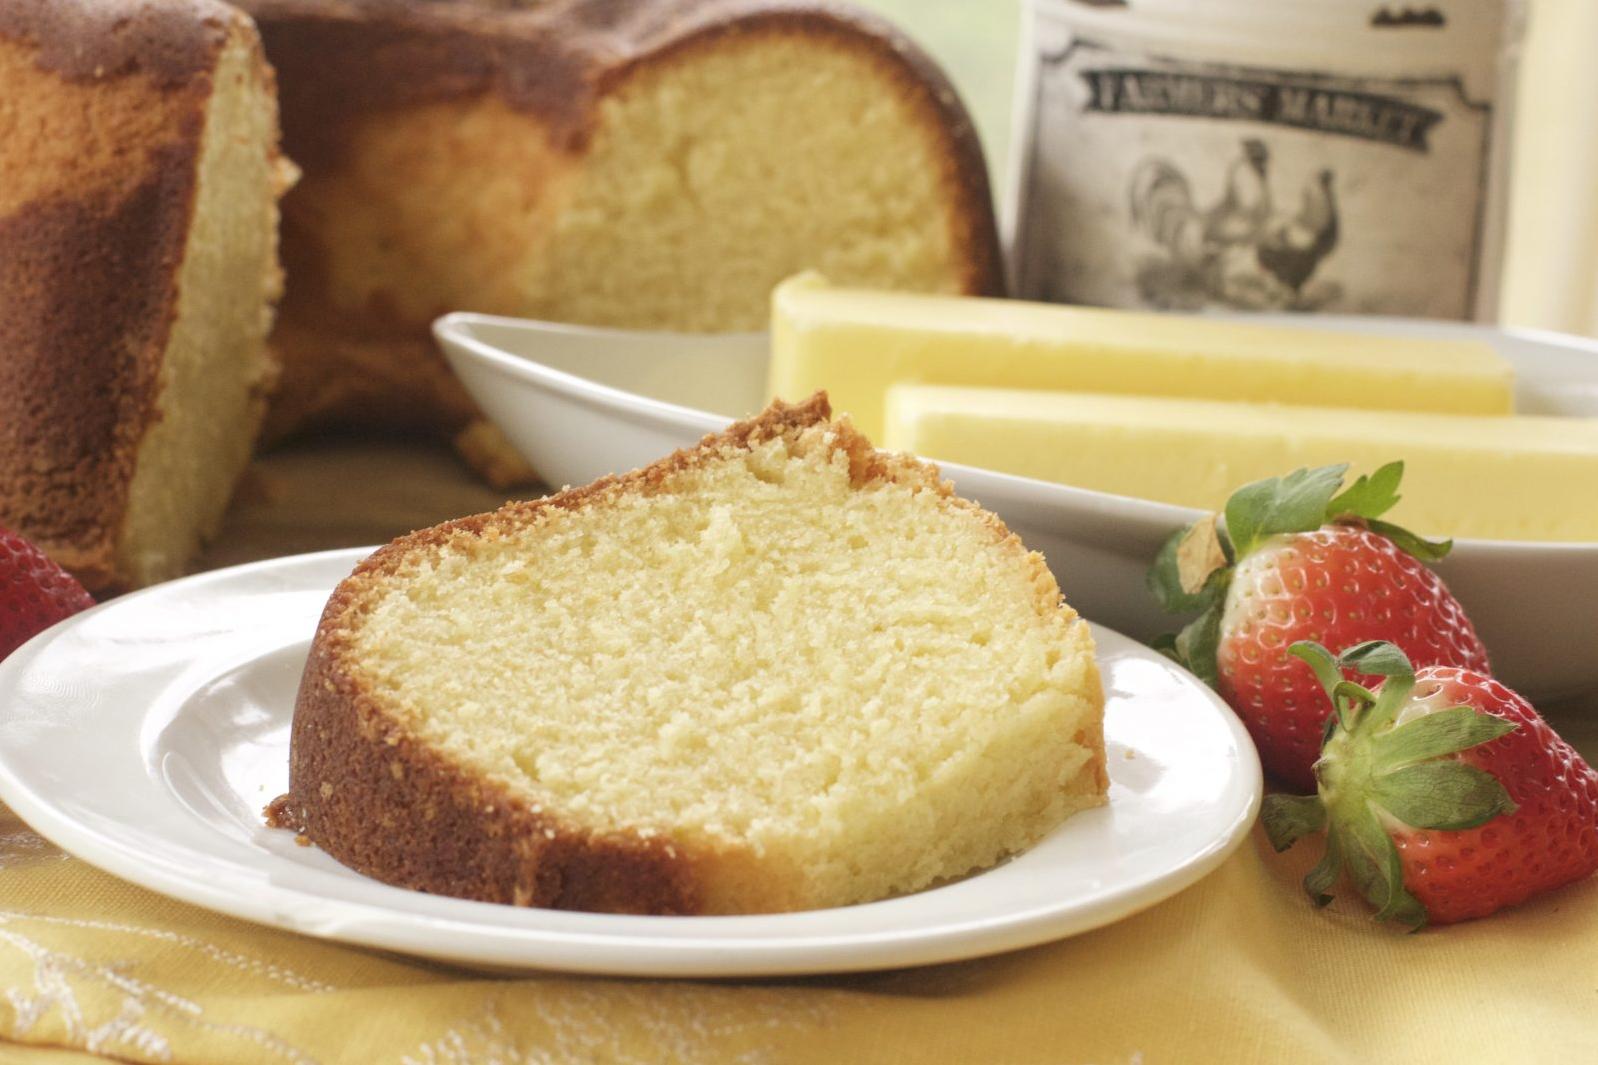  This Pound Cake is perfect for breakfast, a snack or a dessert, satisfying cravings throughout the day